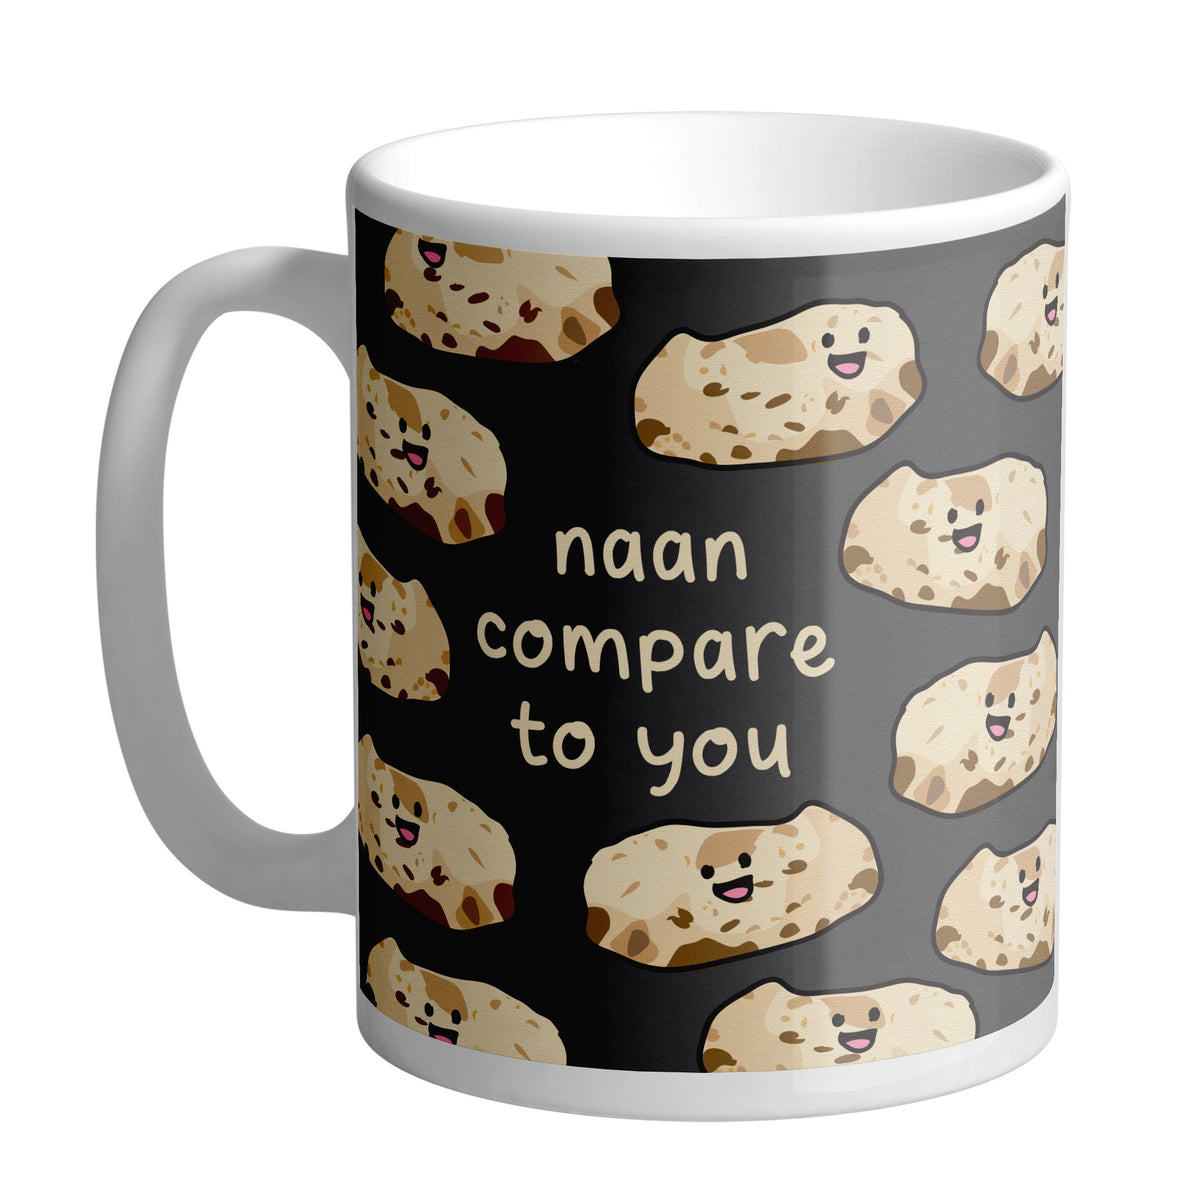 Naan Compare to You Funny Mug by penny black